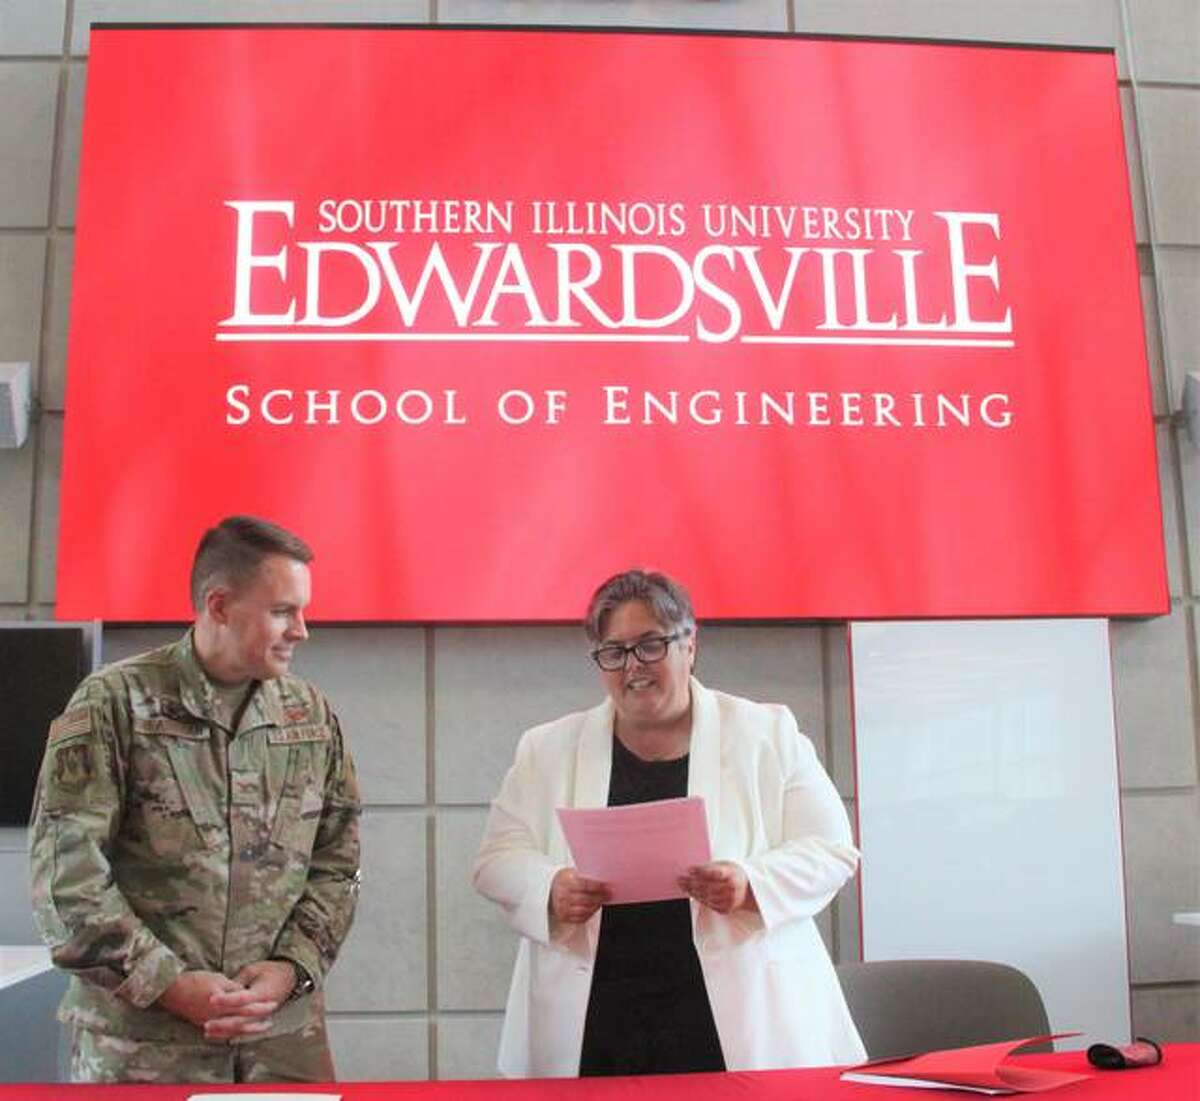 Col. J. Scot Heathman, commander of the 375th Air Mobility Wing at Scott Air Force Base in Belleville, and .SIUE Provost and Vice Chancellor for Academic Affairs Denise Cobb talk before signing a three-year educational agreement between the university and the unit’s “innovation hub” called Elevate.